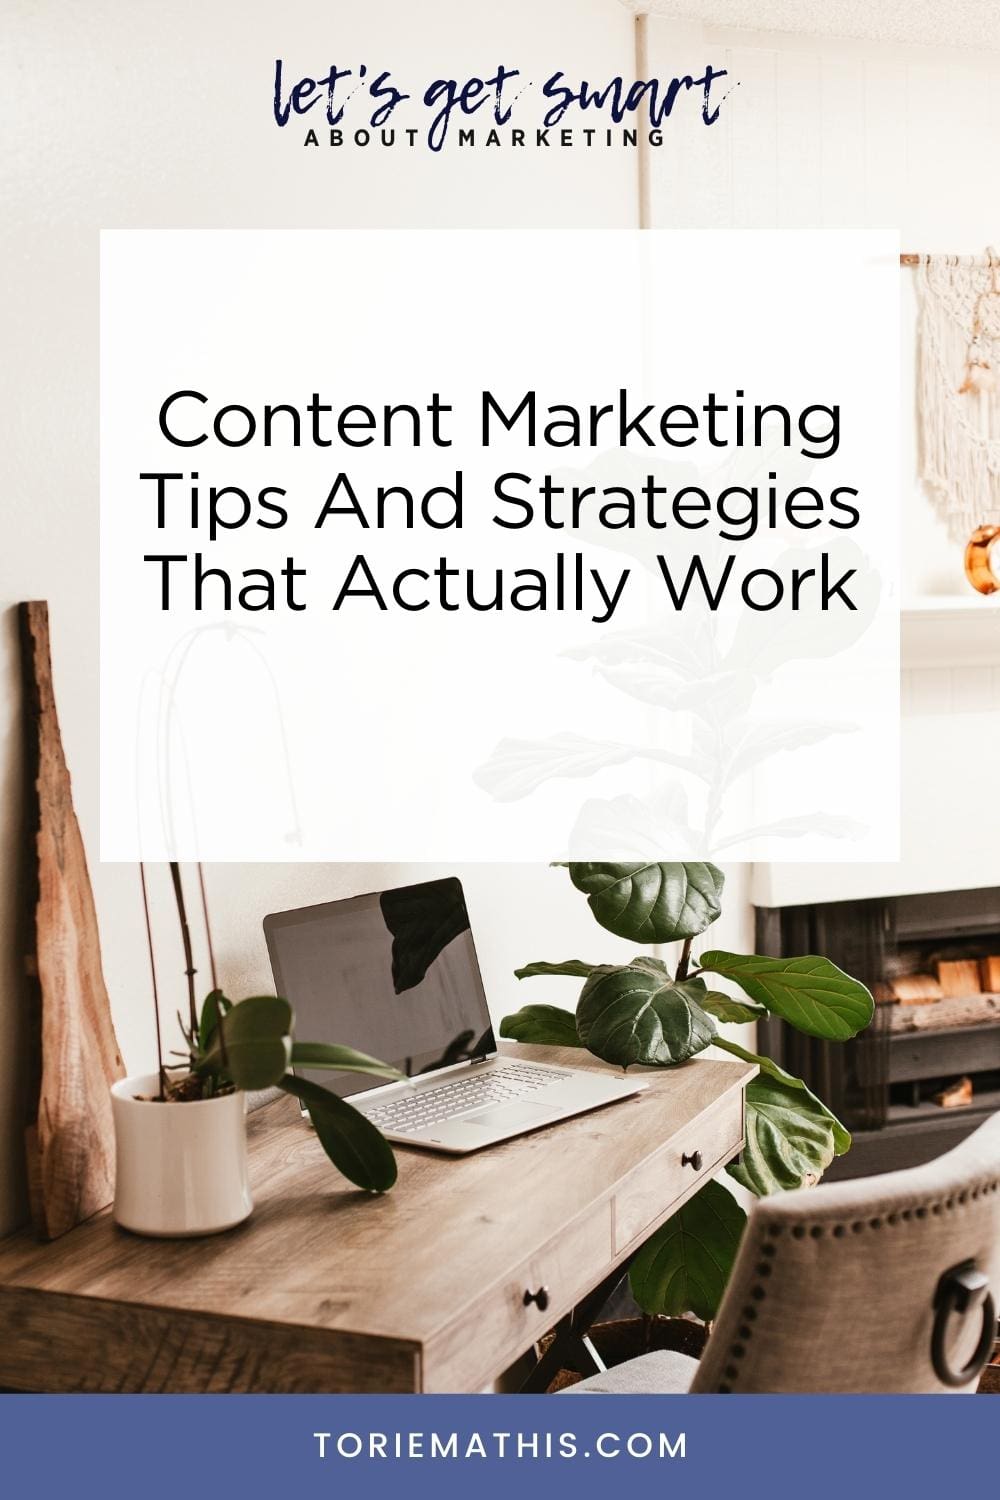 Content Marketing Tips And Strategies That Actually Work